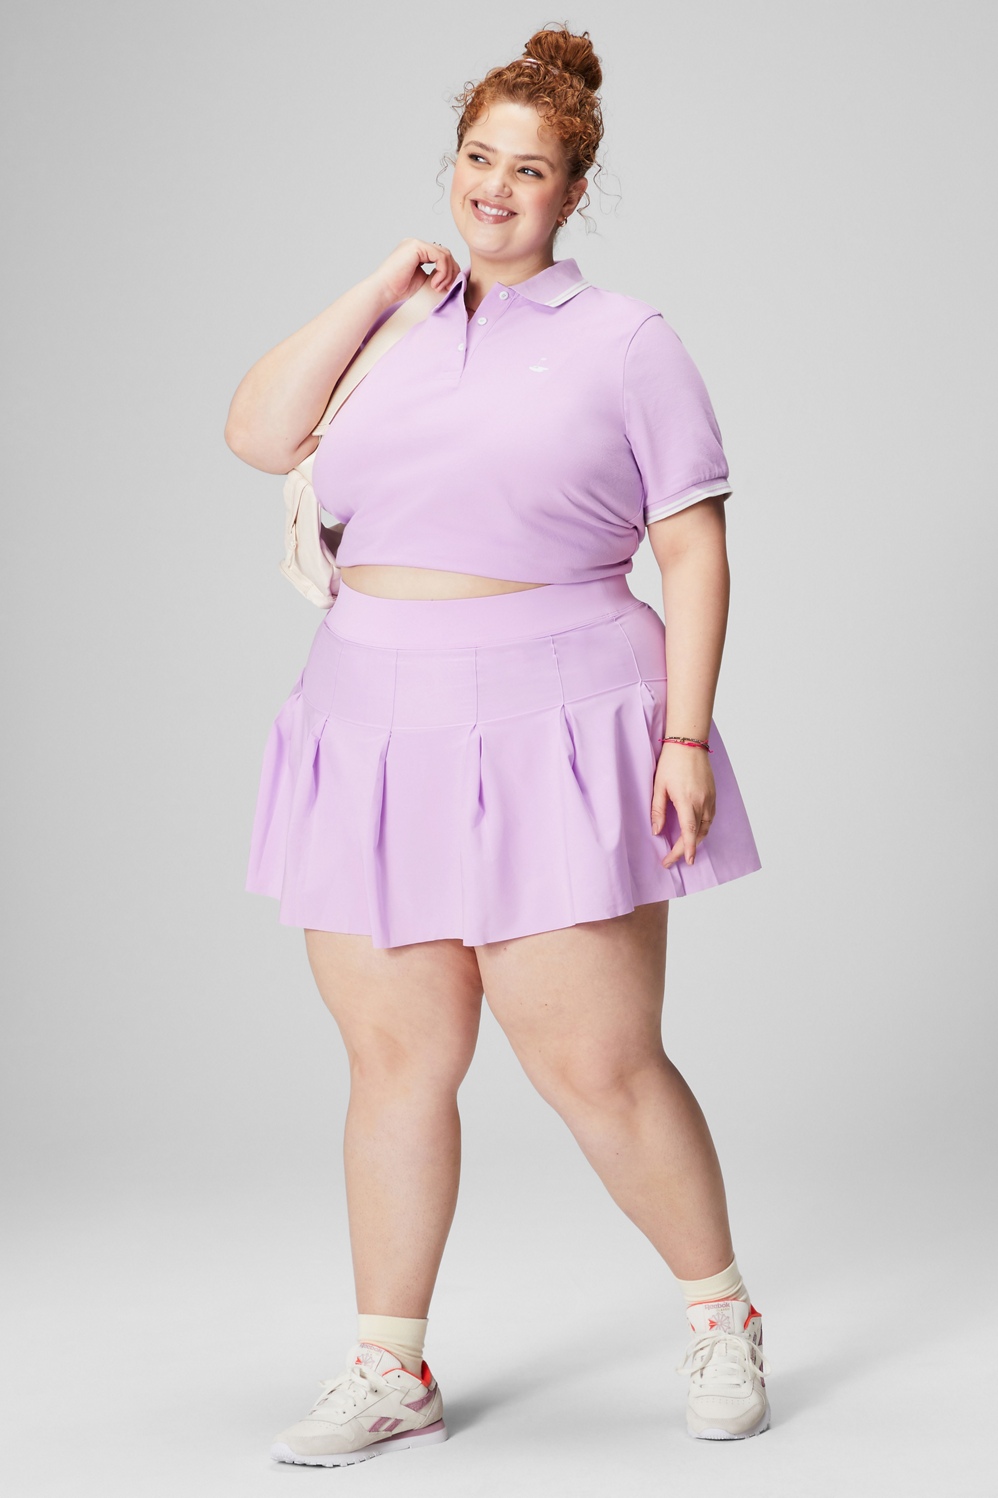 Pleated Skirt With Built-In Short - Fabletics Canada